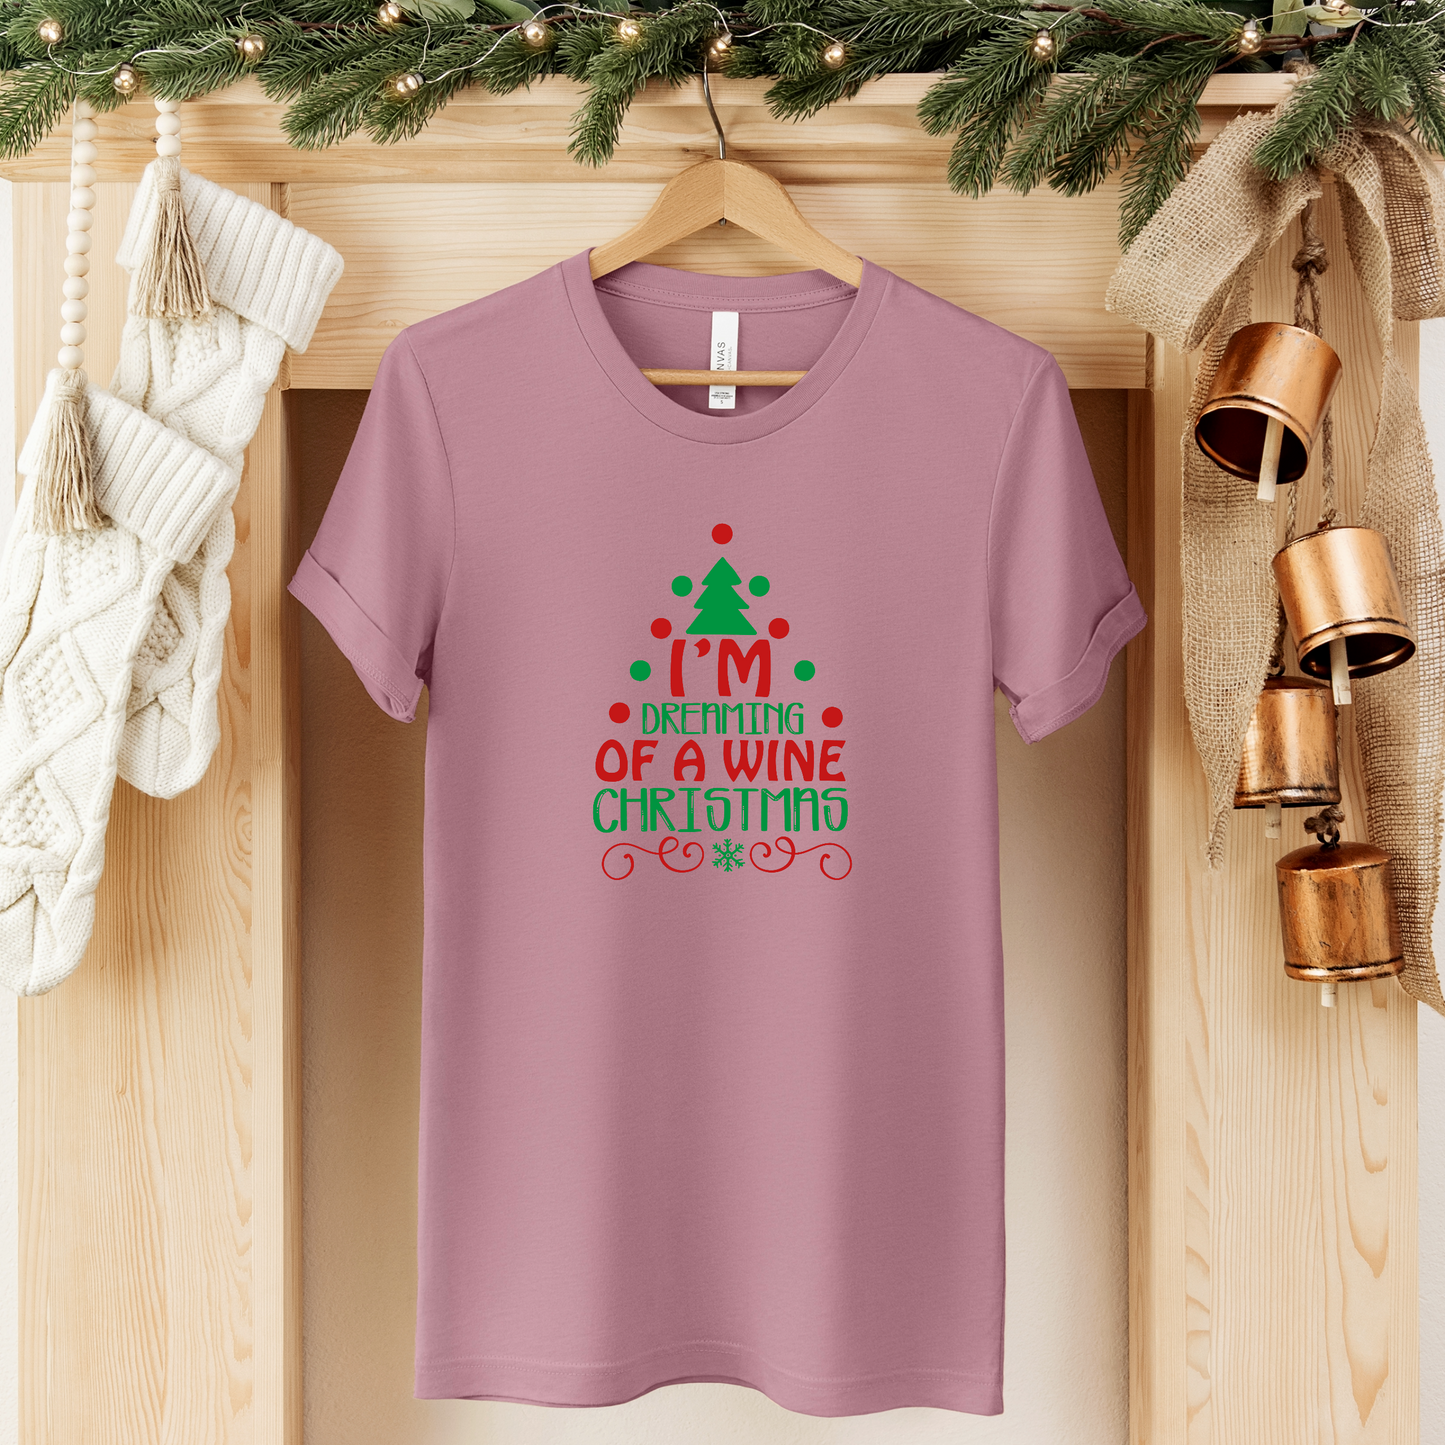 Wine T-Shirt For Christmas T Shirt For Dream TShirt For Drinking Tee For Holiday Gift Idea